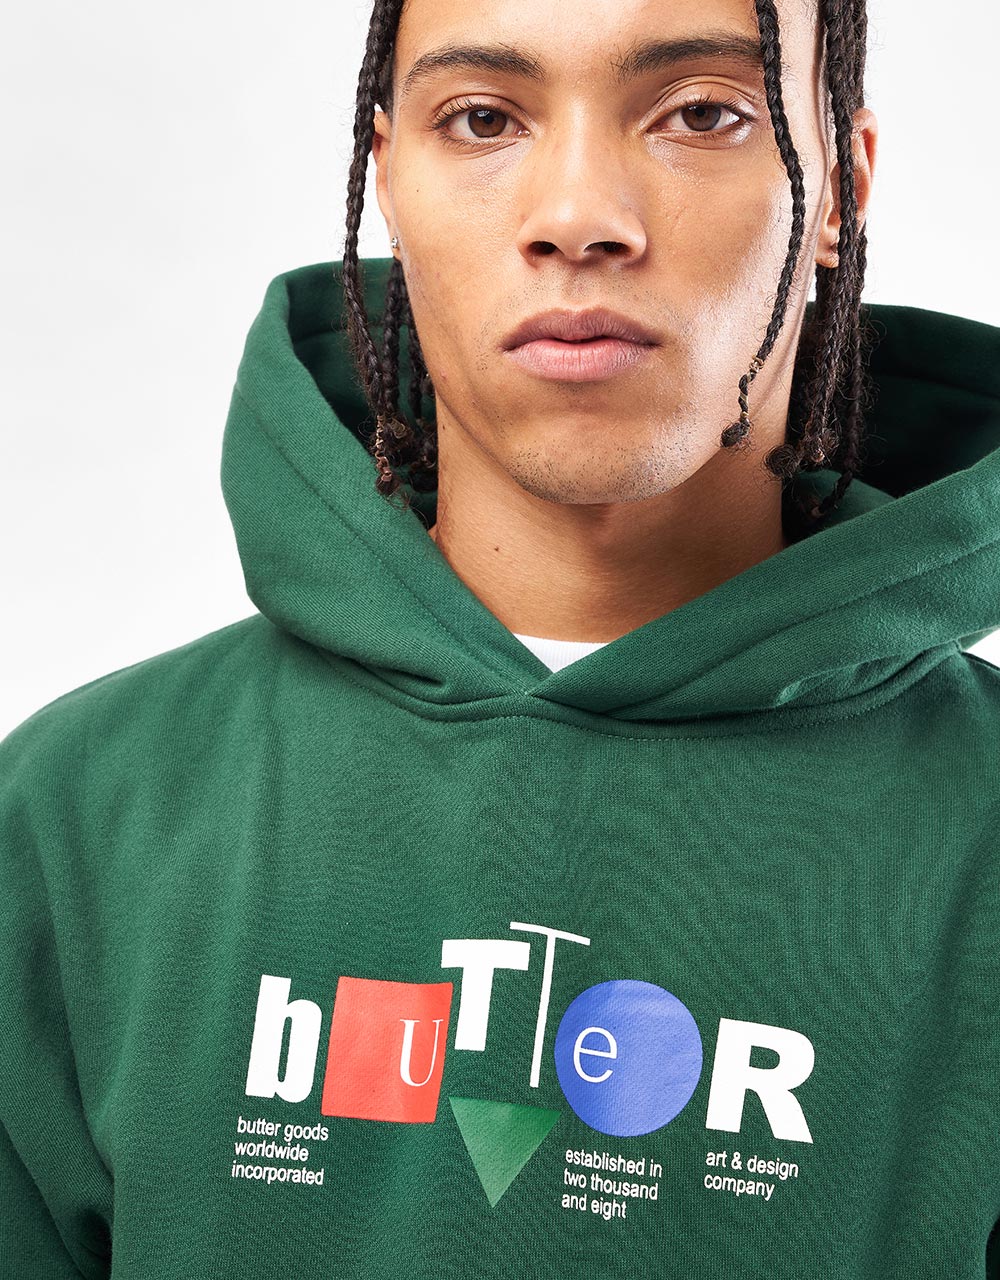 Butter Goods Design Co Pullover Hoodie - Forest Green